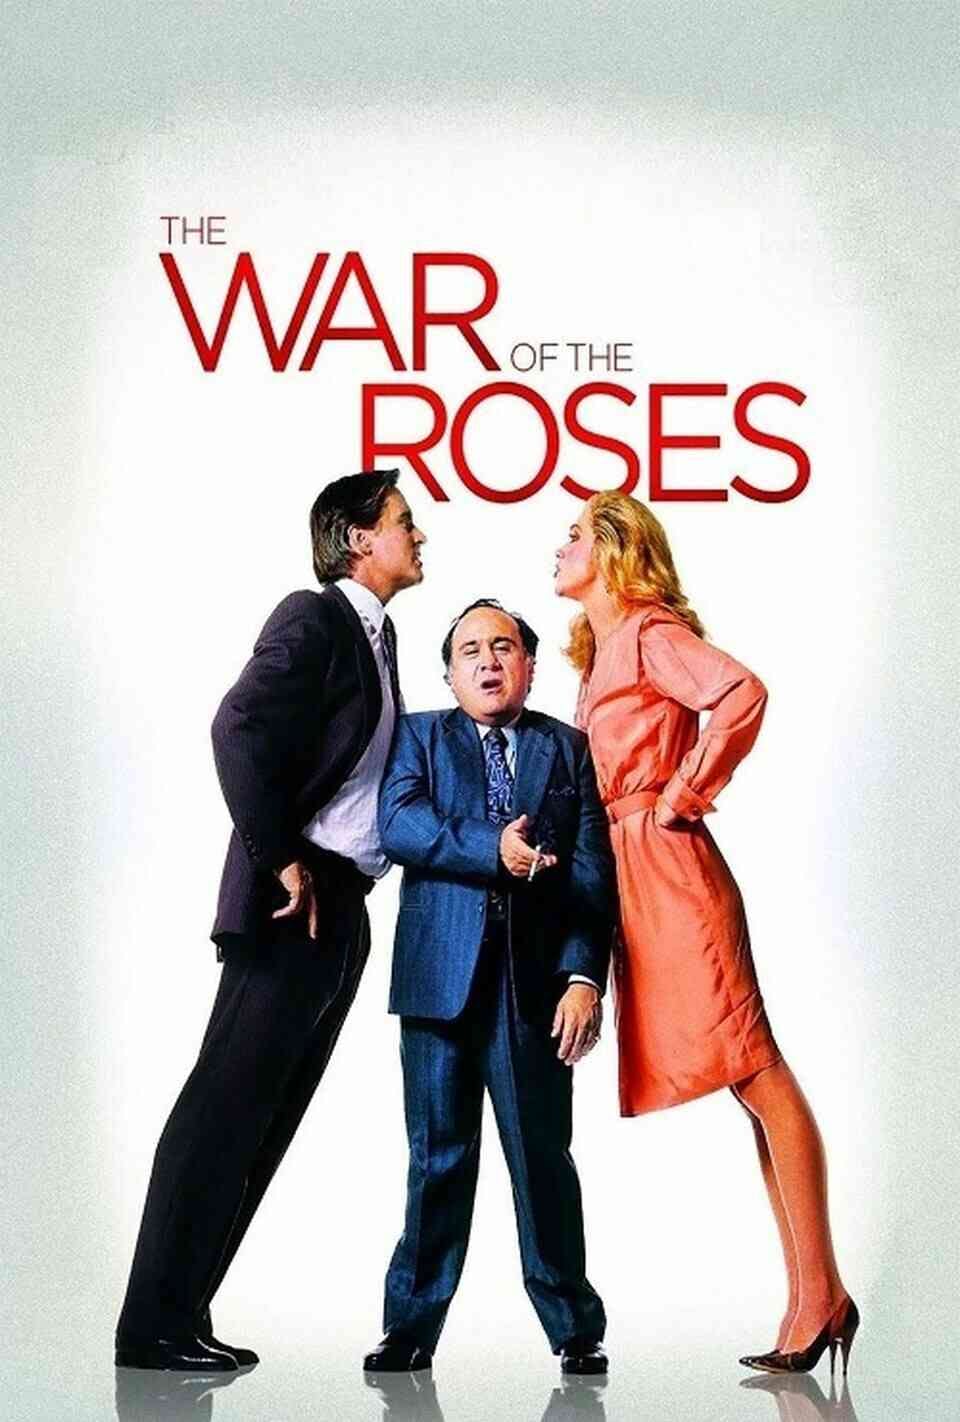 Read War of the Roses screenplay (poster)